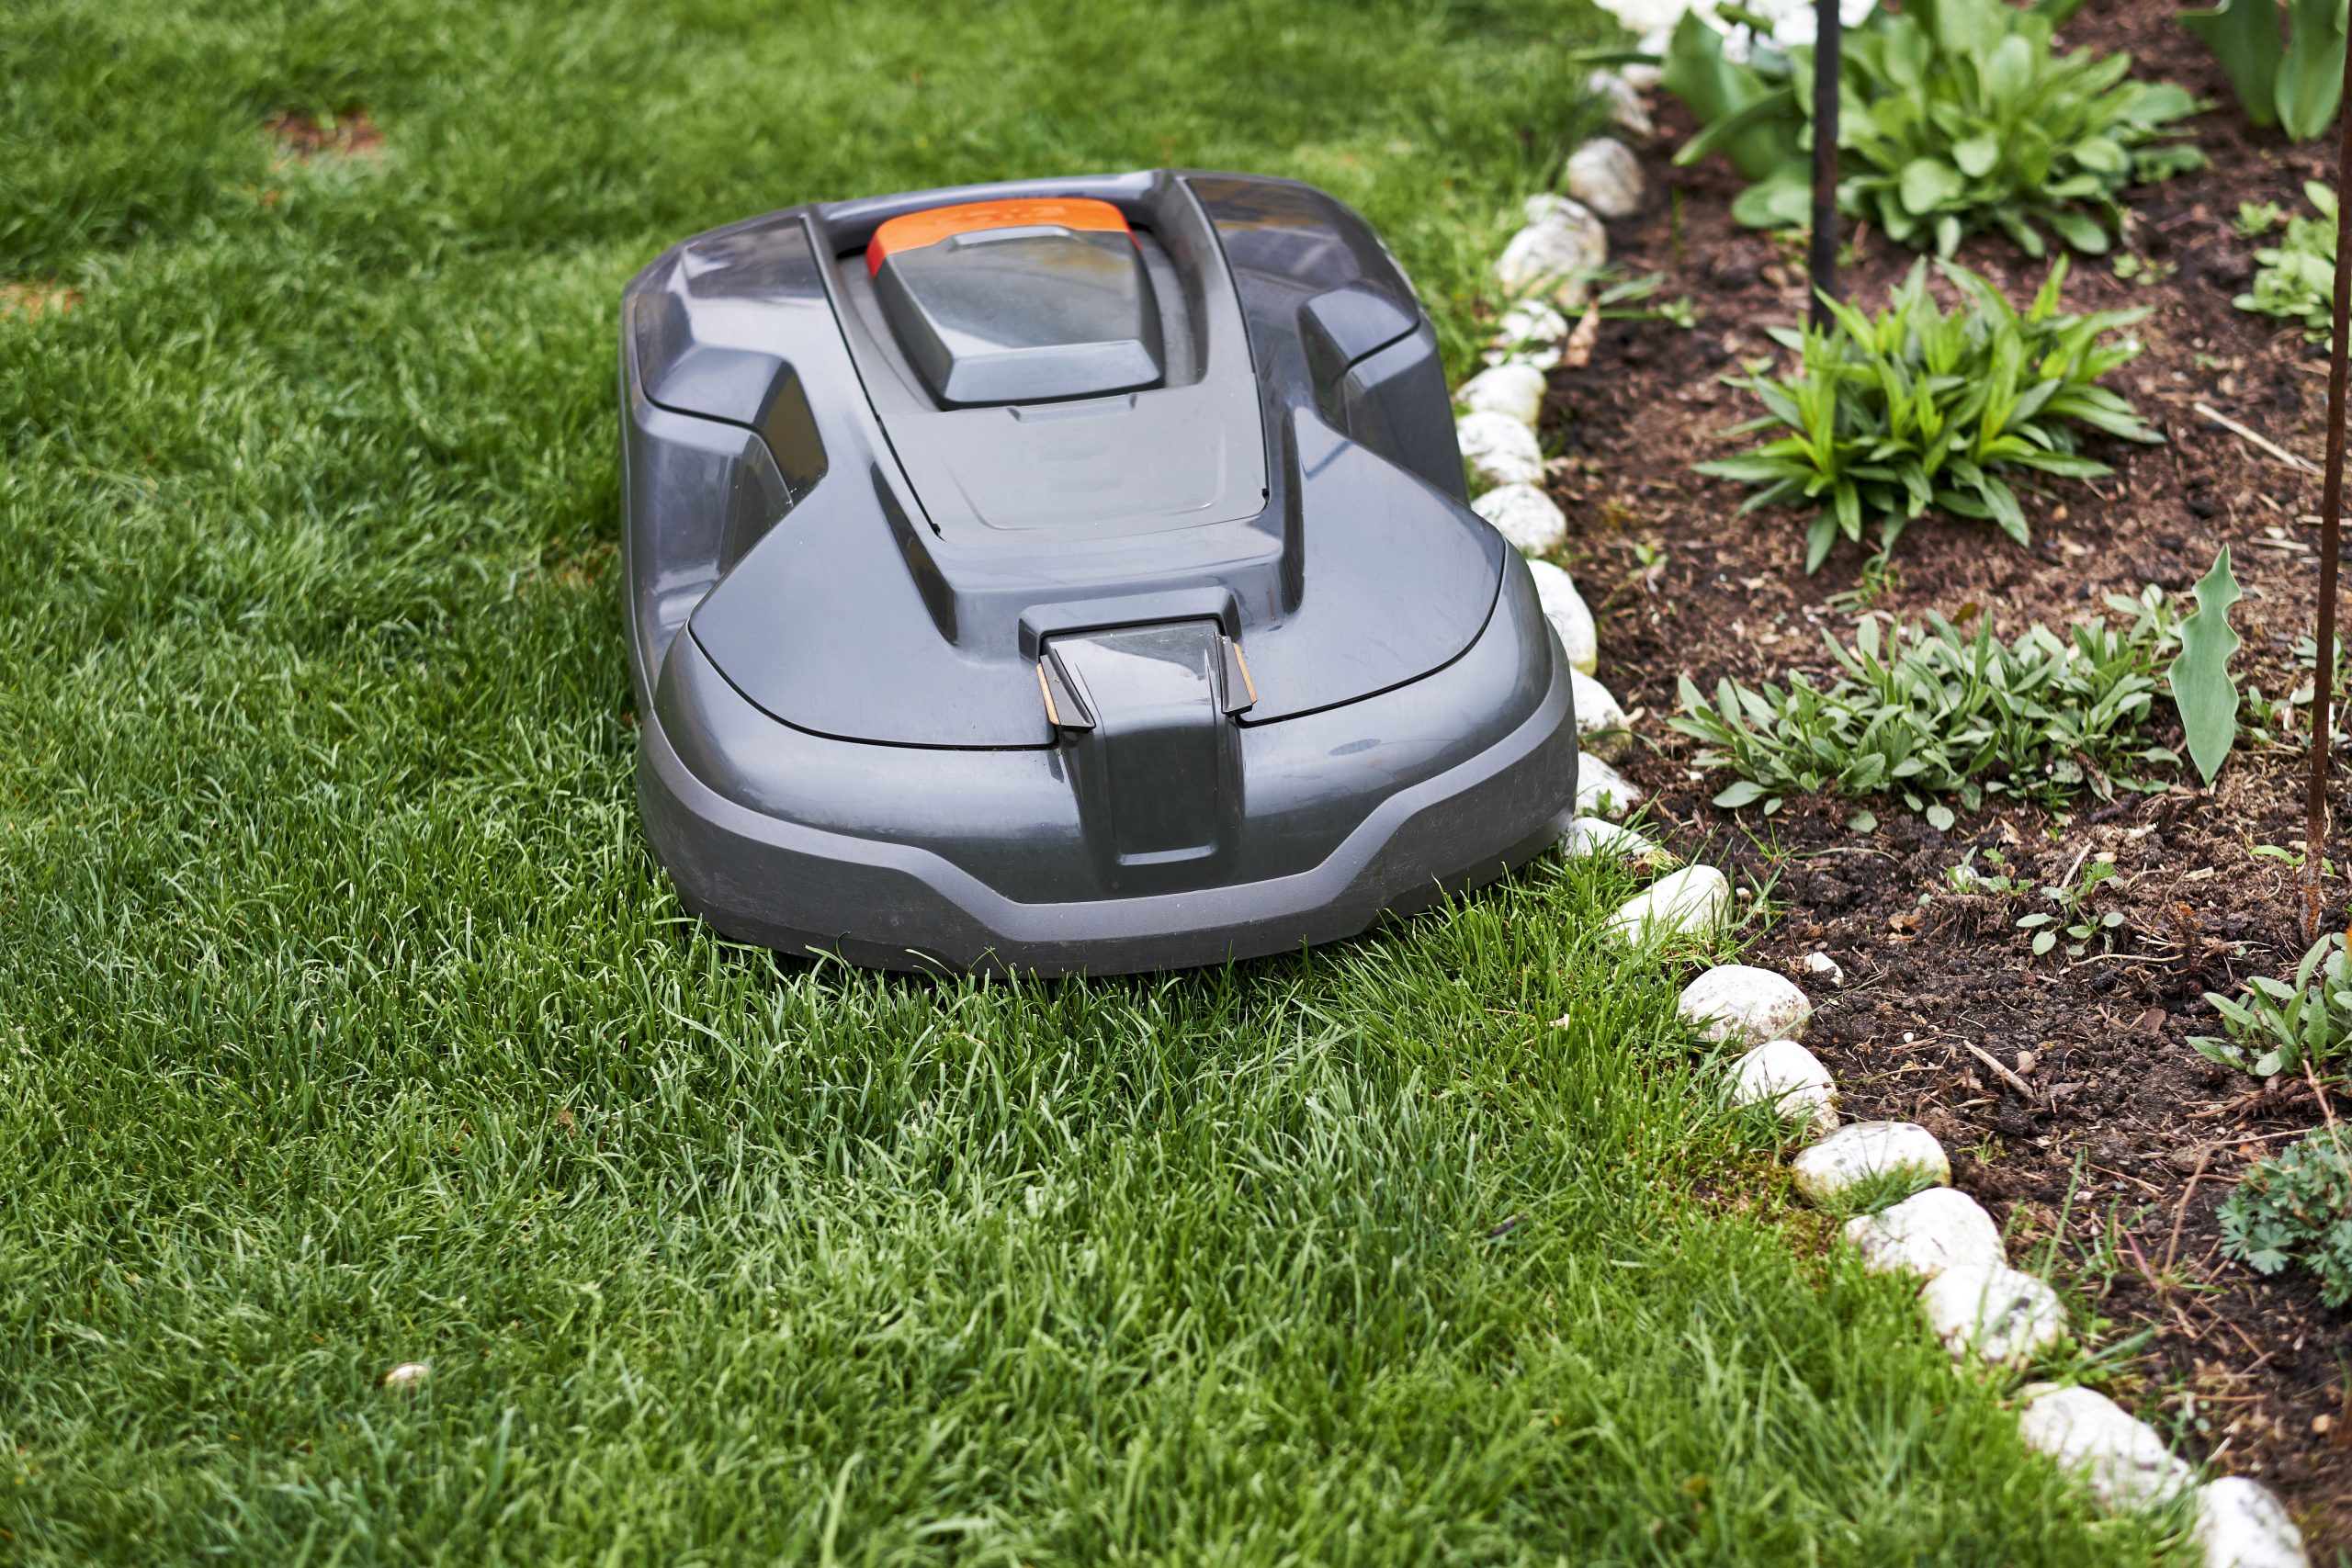 6 Automated Robot Lawn Mower Units Your Backyard Storables